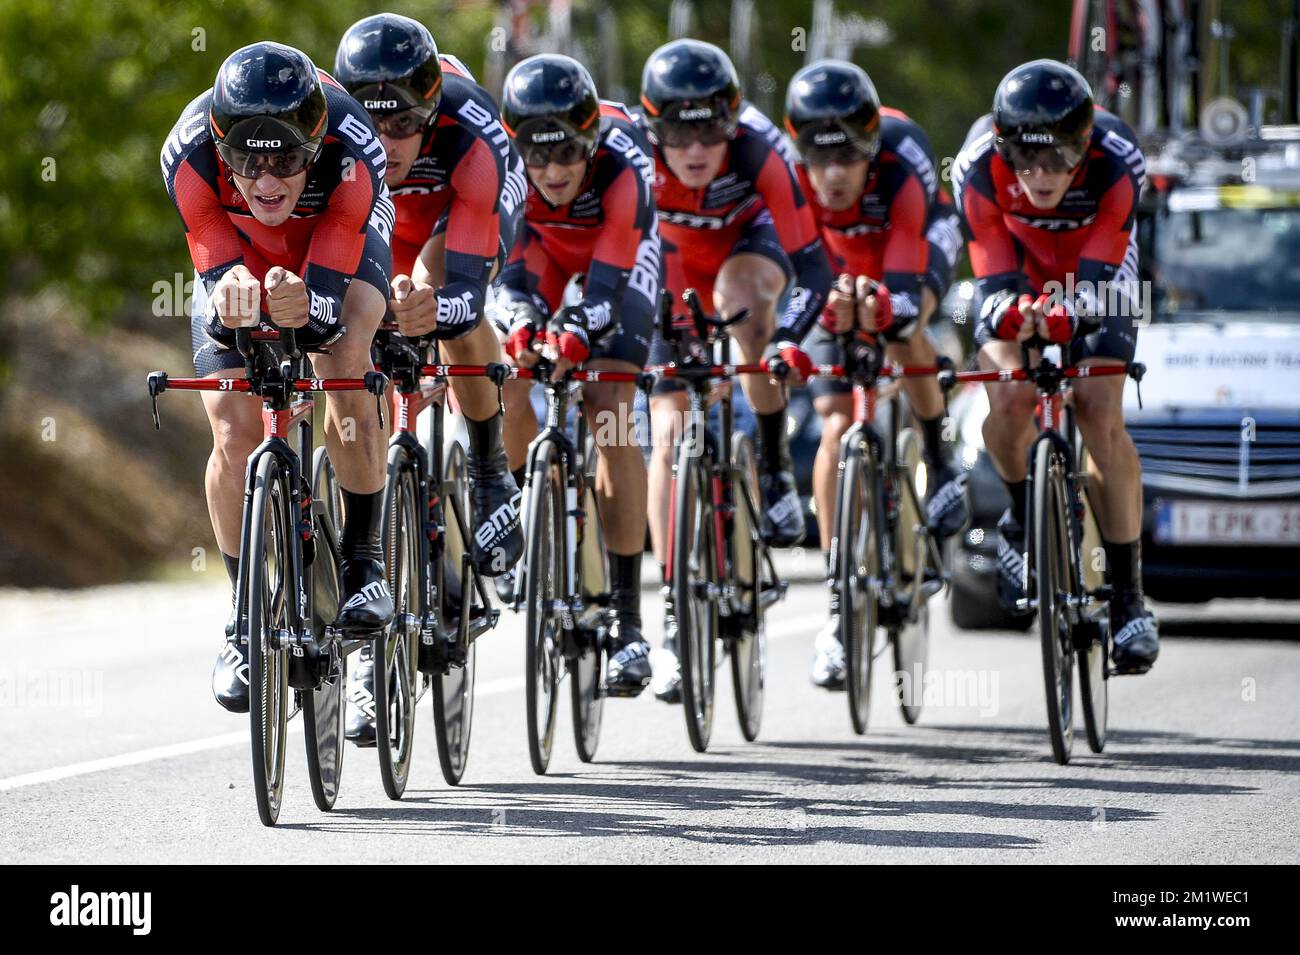 BMC Racing Team riders pictured during the men's team time trial at the UCI World Cycling championships in Ponferrada, Spain, Sunday 21 September 2014.  Stock Photo